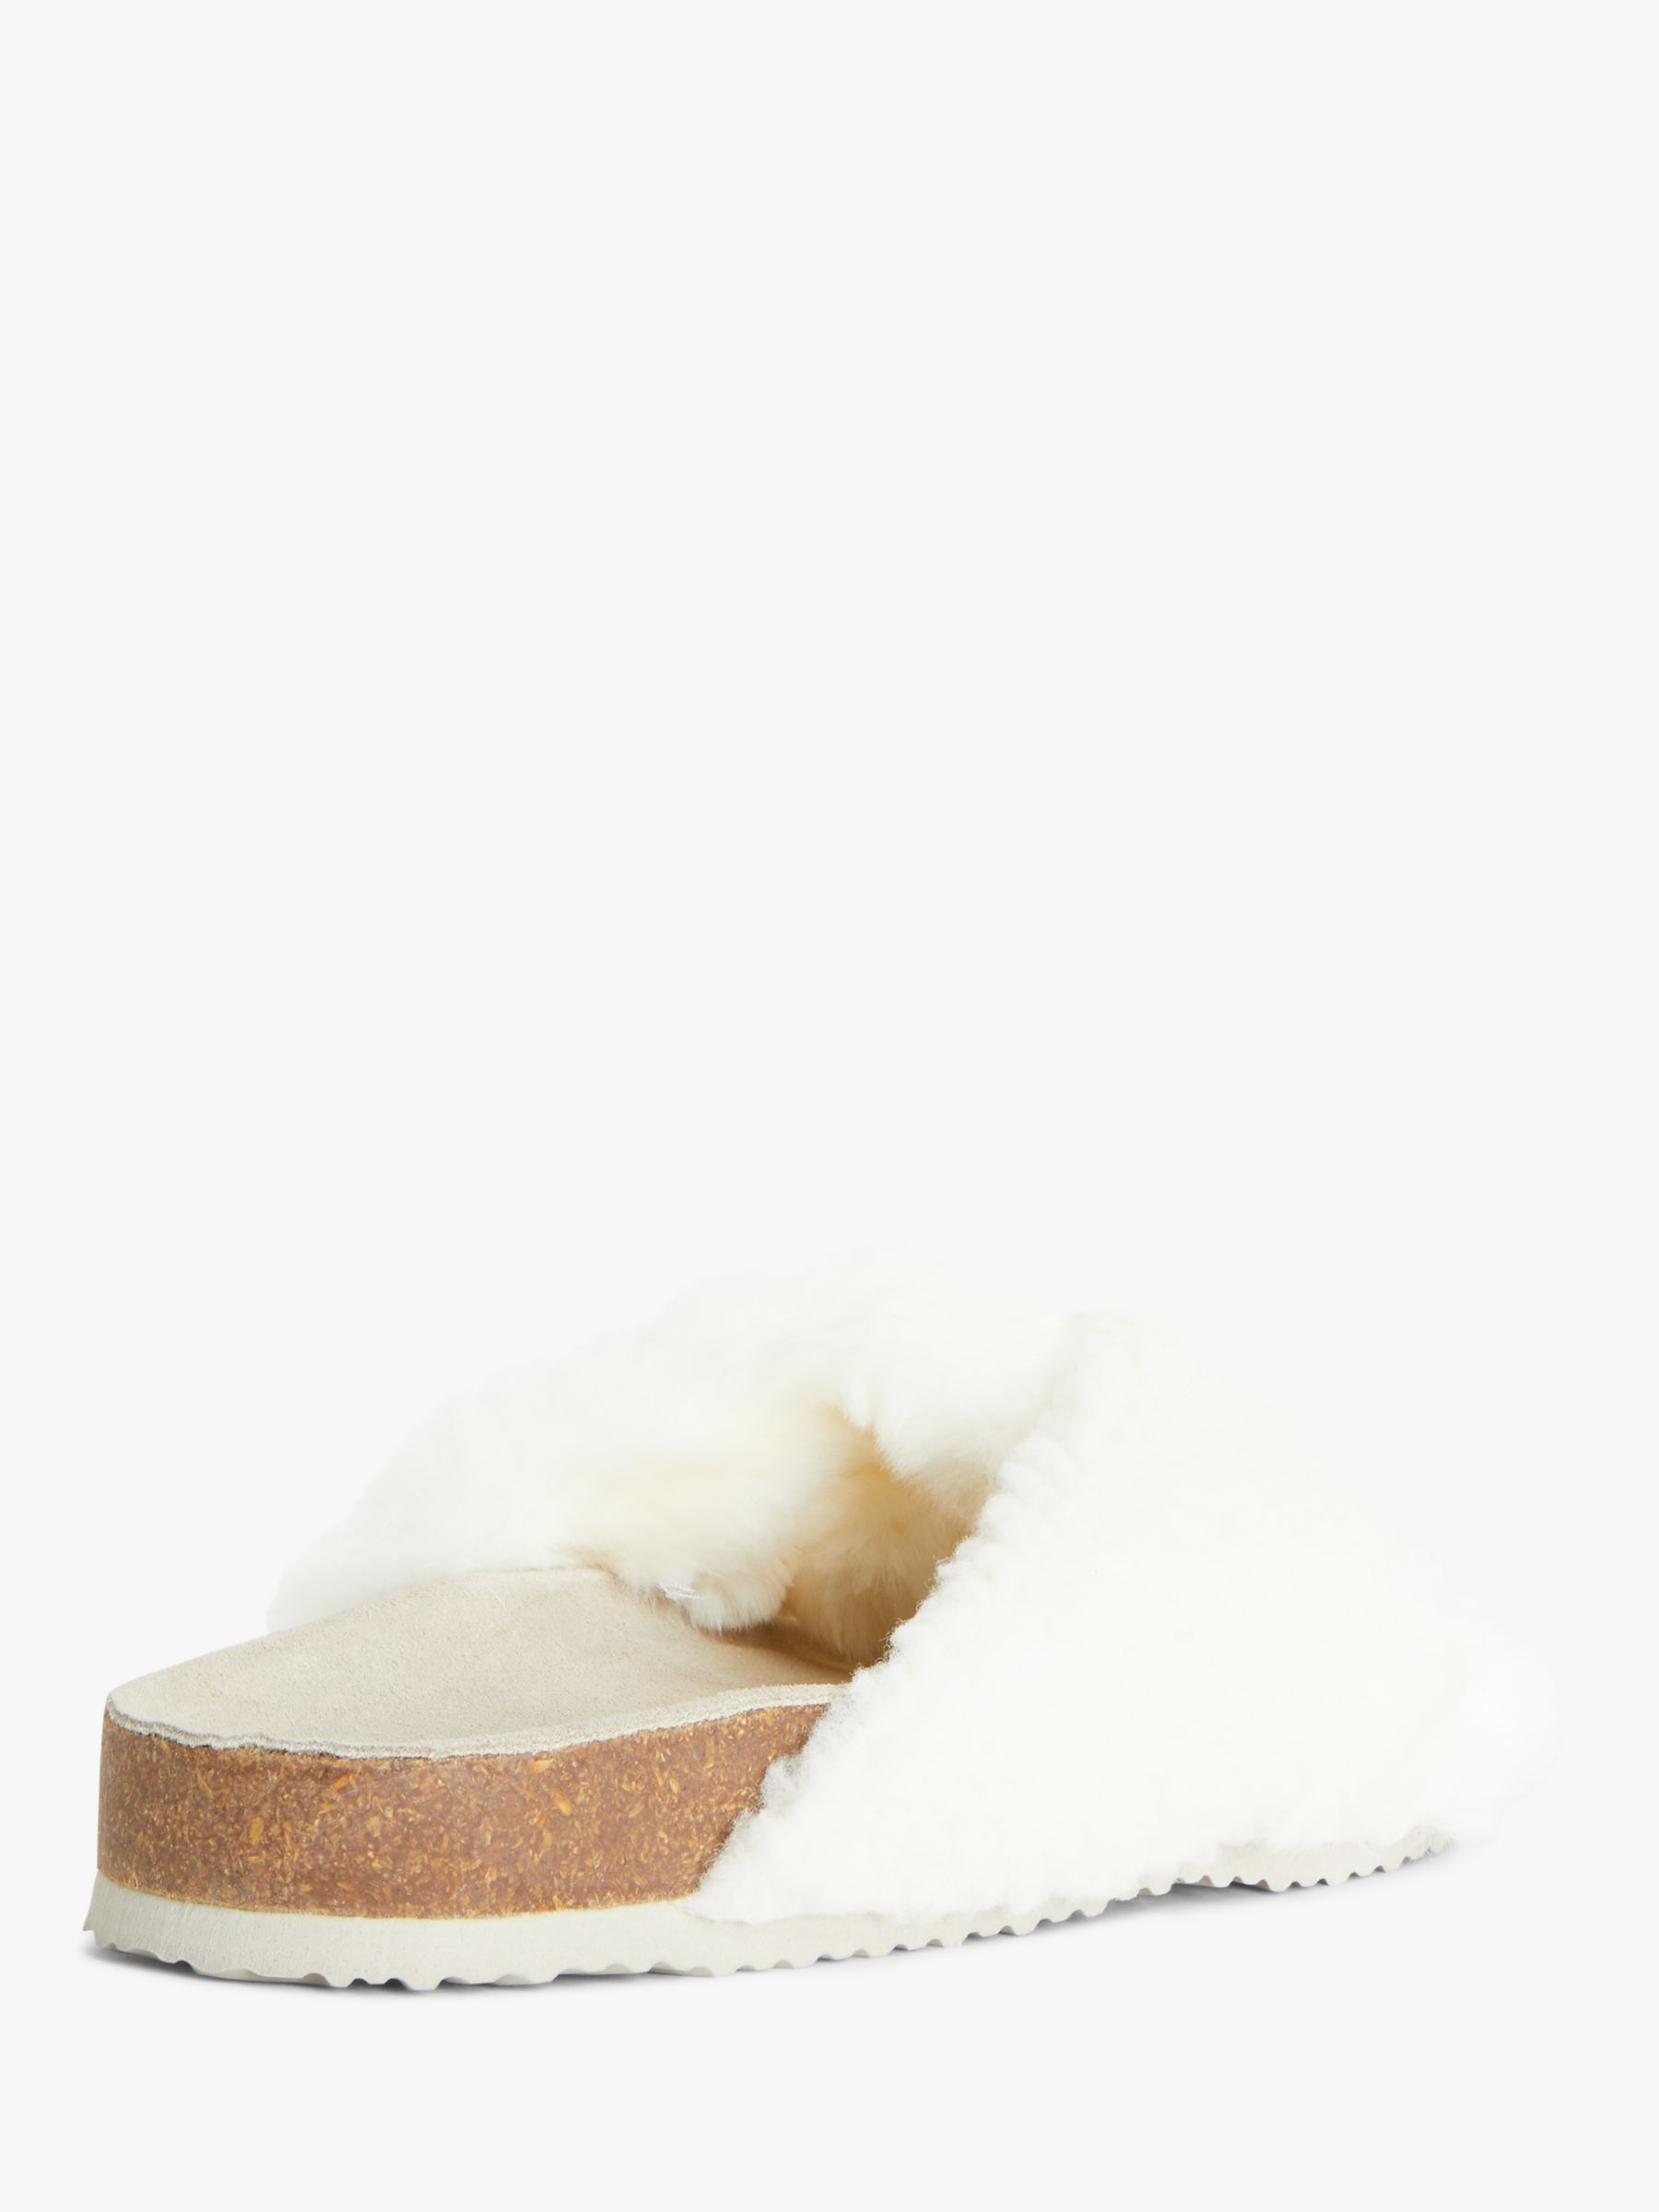 ANYDAY John Lewis & Partners Cross Strap Faux Fur Mule Slippers, Cream ...